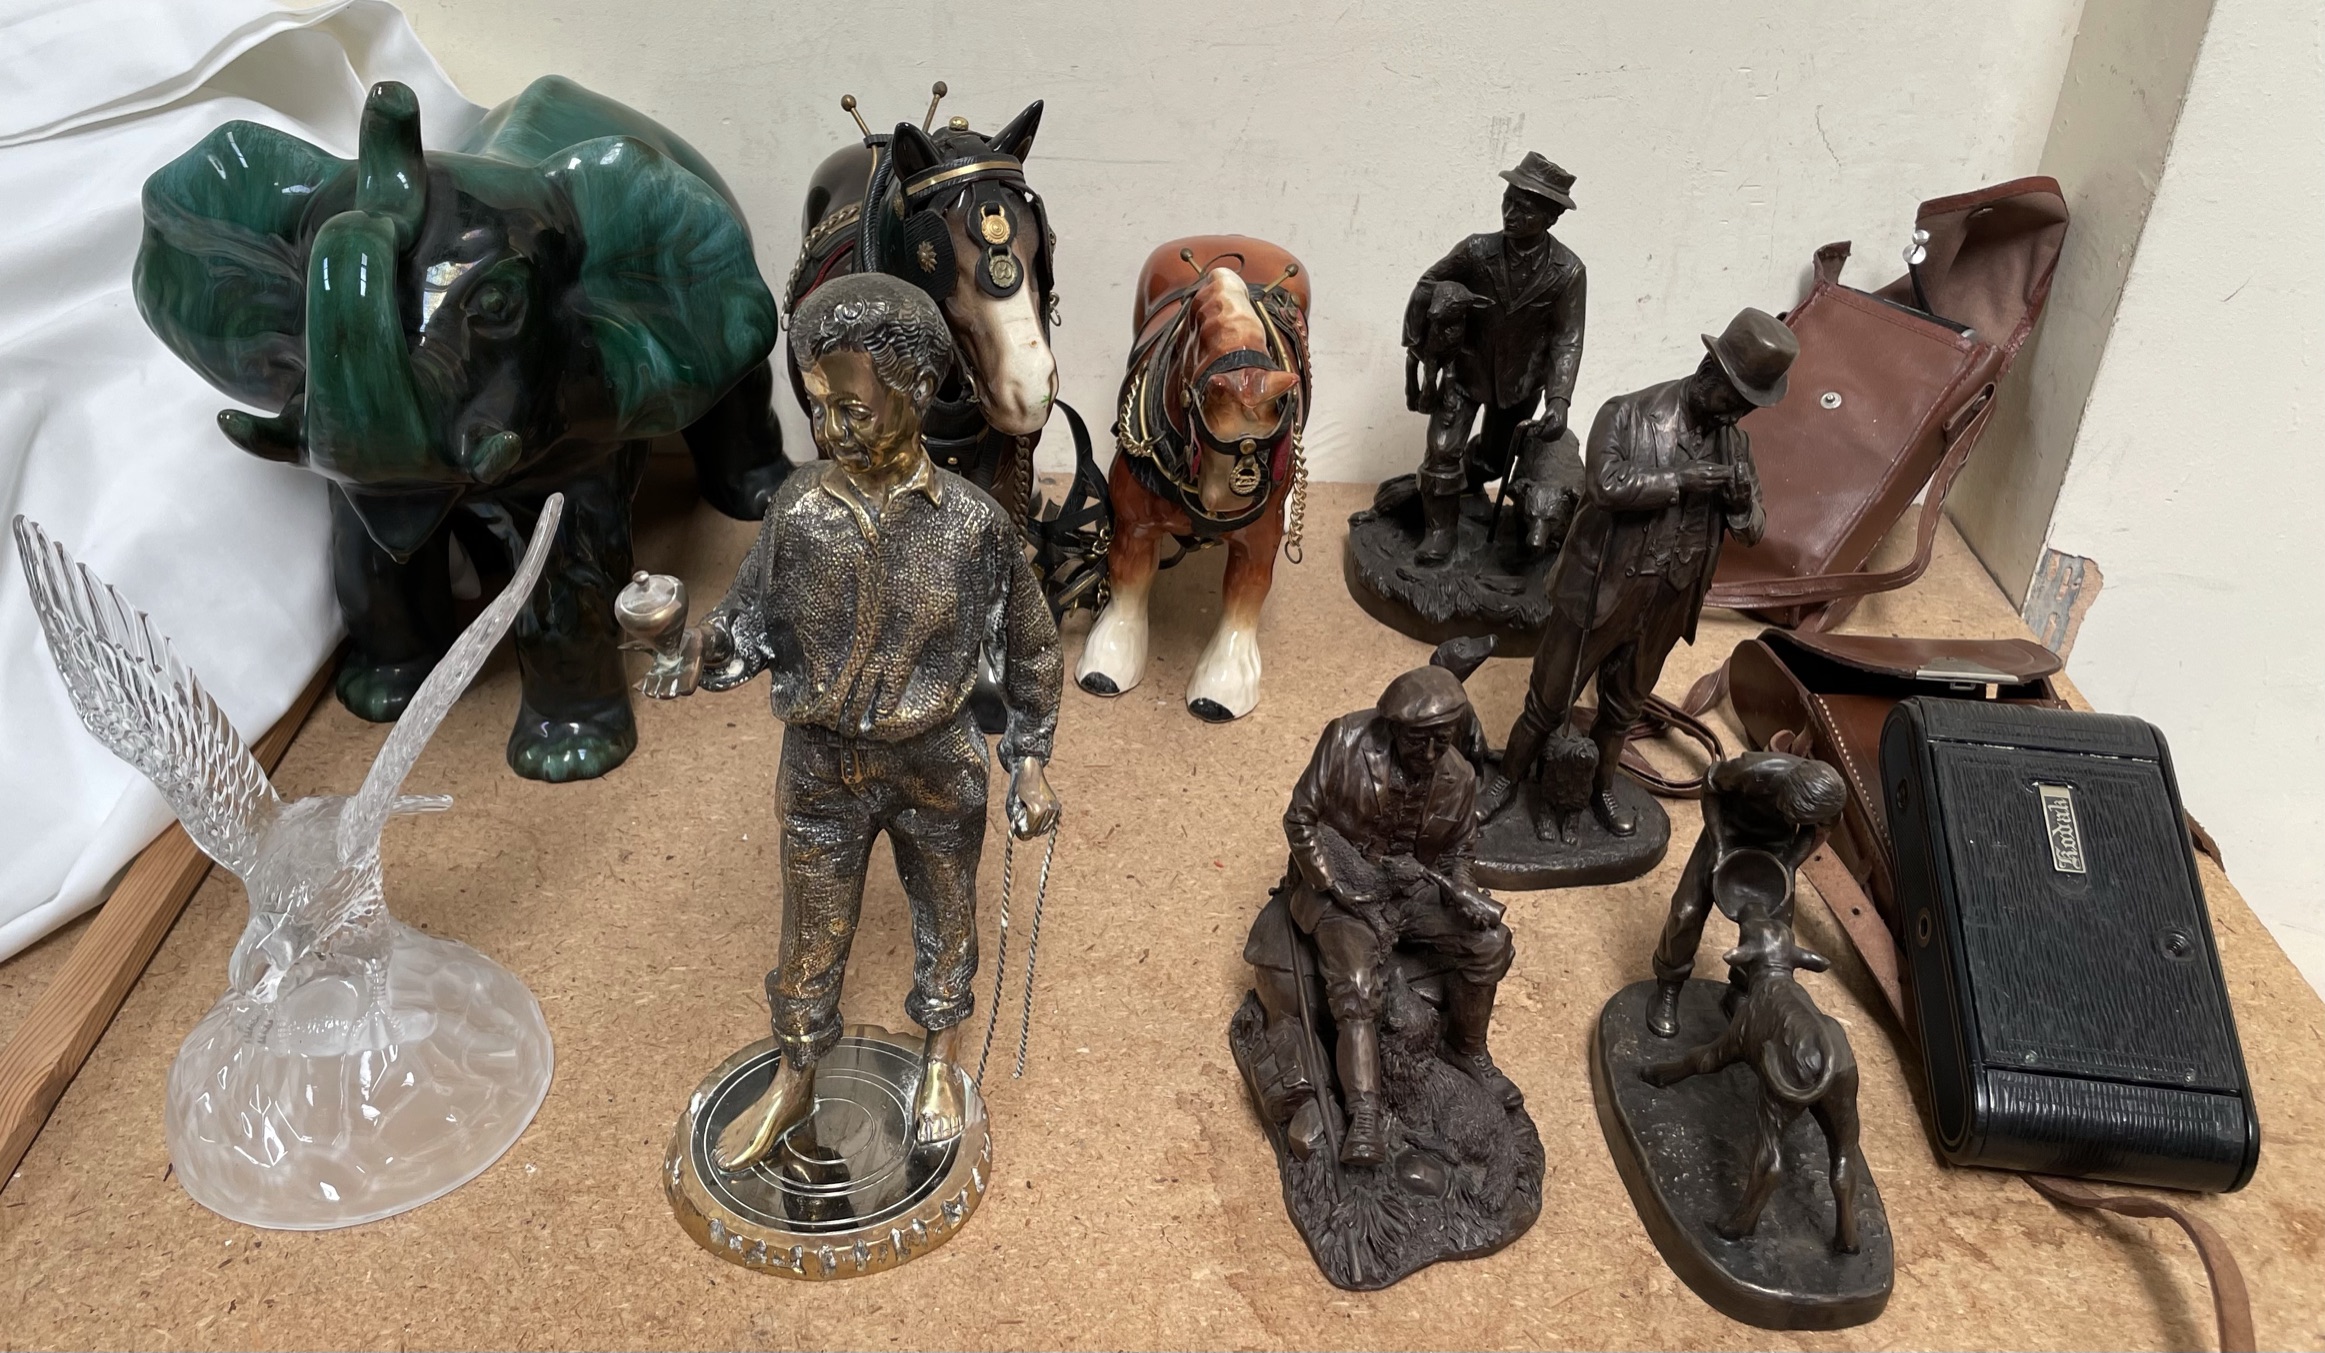 Heredities simulated bronze figures, together with pottery horses,